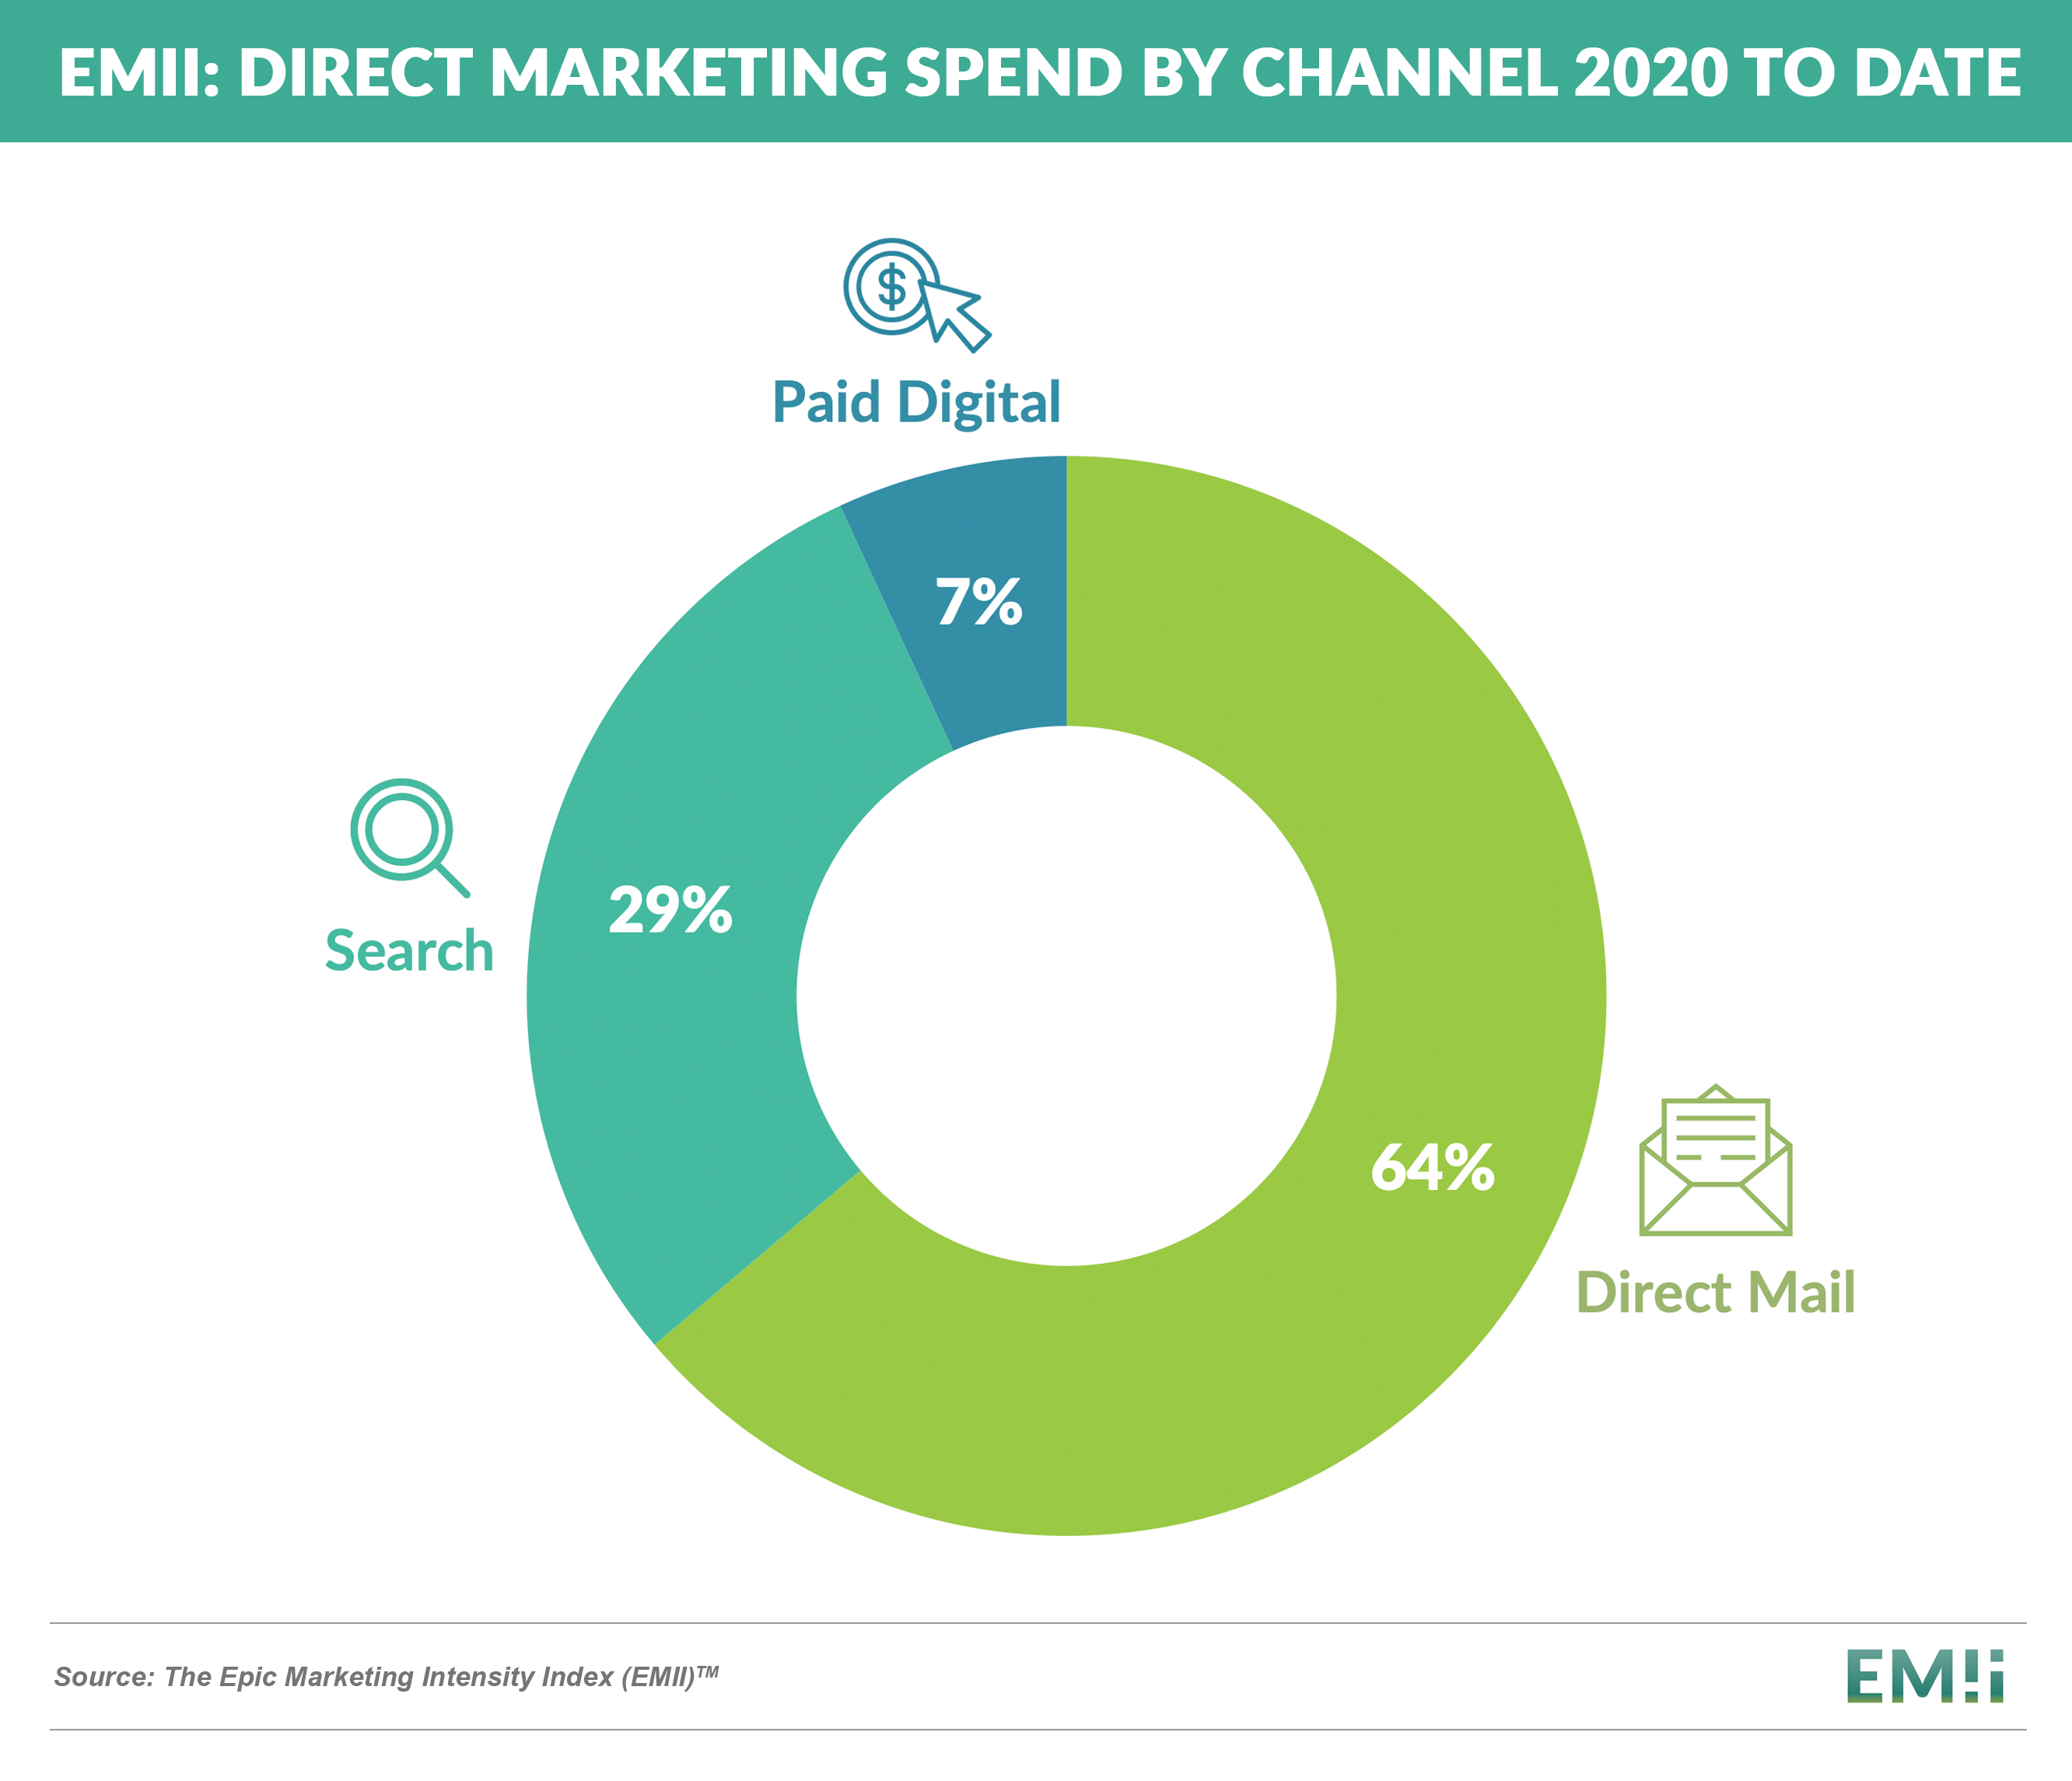 2020-to-date Direct-to-Consumer Marketing Spend by Channel